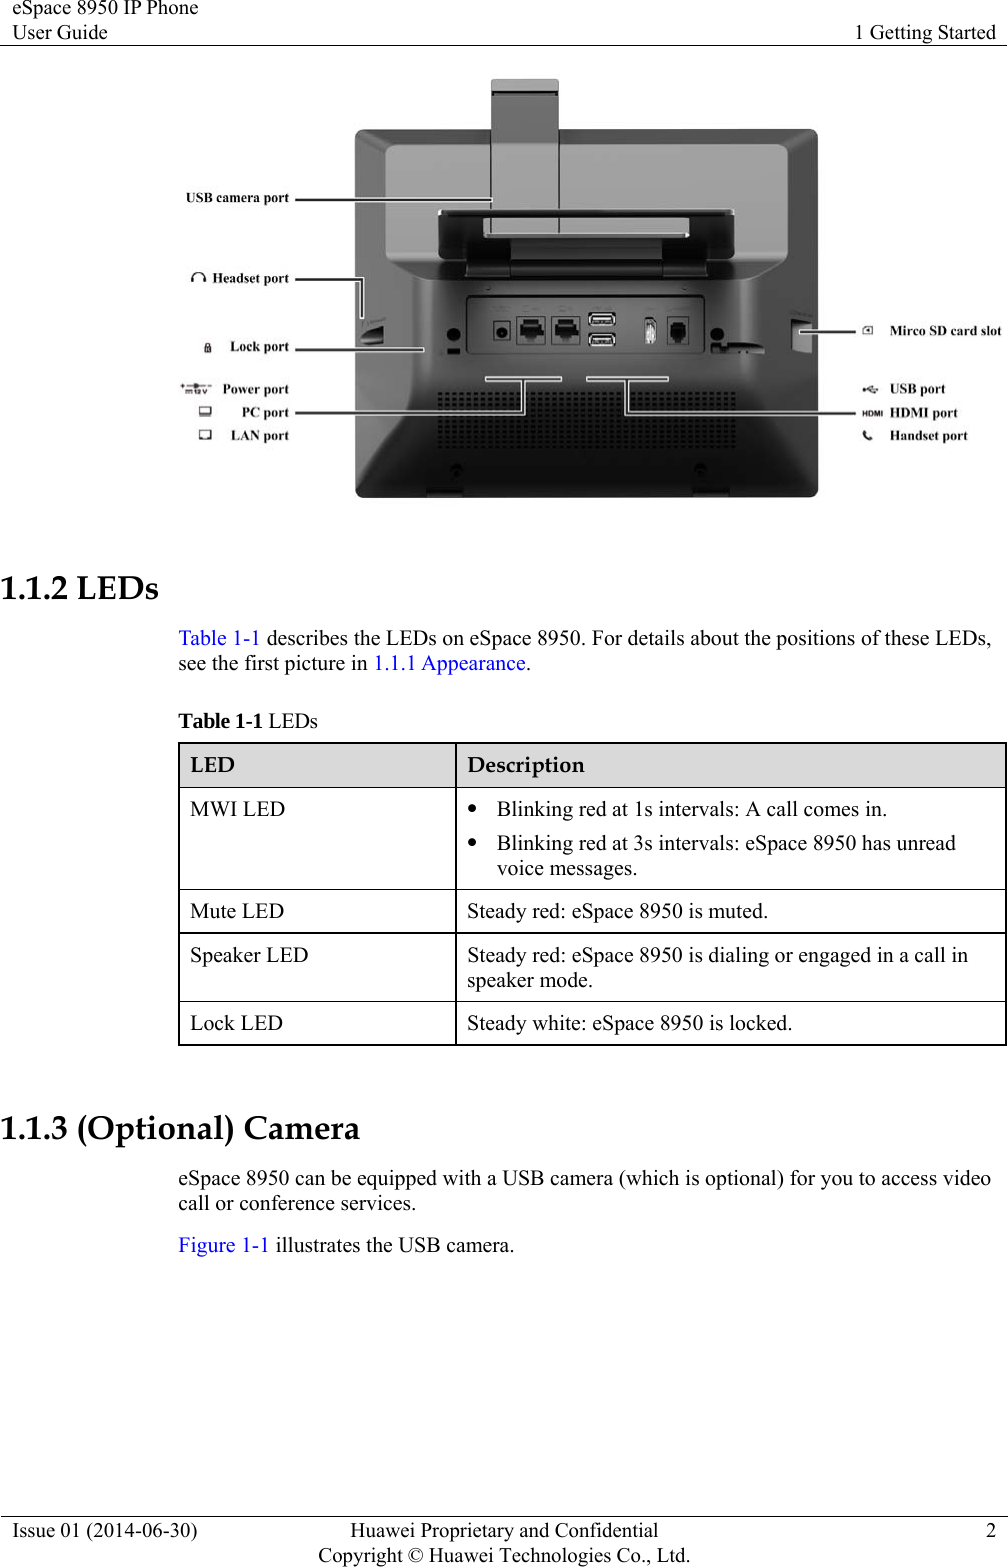 eSpace 8950 IP Phone User Guide  1 Getting Started Issue 01 (2014-06-30)  Huawei Proprietary and Confidential         Copyright © Huawei Technologies Co., Ltd.2   1.1.2 LEDs Table 1-1 describes the LEDs on eSpace 8950. For details about the positions of these LEDs, see the first picture in 1.1.1 Appearance. Table 1-1 LEDs LED  Description MWI LED   Blinking red at 1s intervals: A call comes in.  Blinking red at 3s intervals: eSpace 8950 has unread voice messages. Mute LED  Steady red: eSpace 8950 is muted. Speaker LED  Steady red: eSpace 8950 is dialing or engaged in a call in speaker mode. Lock LED  Steady white: eSpace 8950 is locked.  1.1.3 (Optional) Camera eSpace 8950 can be equipped with a USB camera (which is optional) for you to access video call or conference services. Figure 1-1 illustrates the USB camera. 